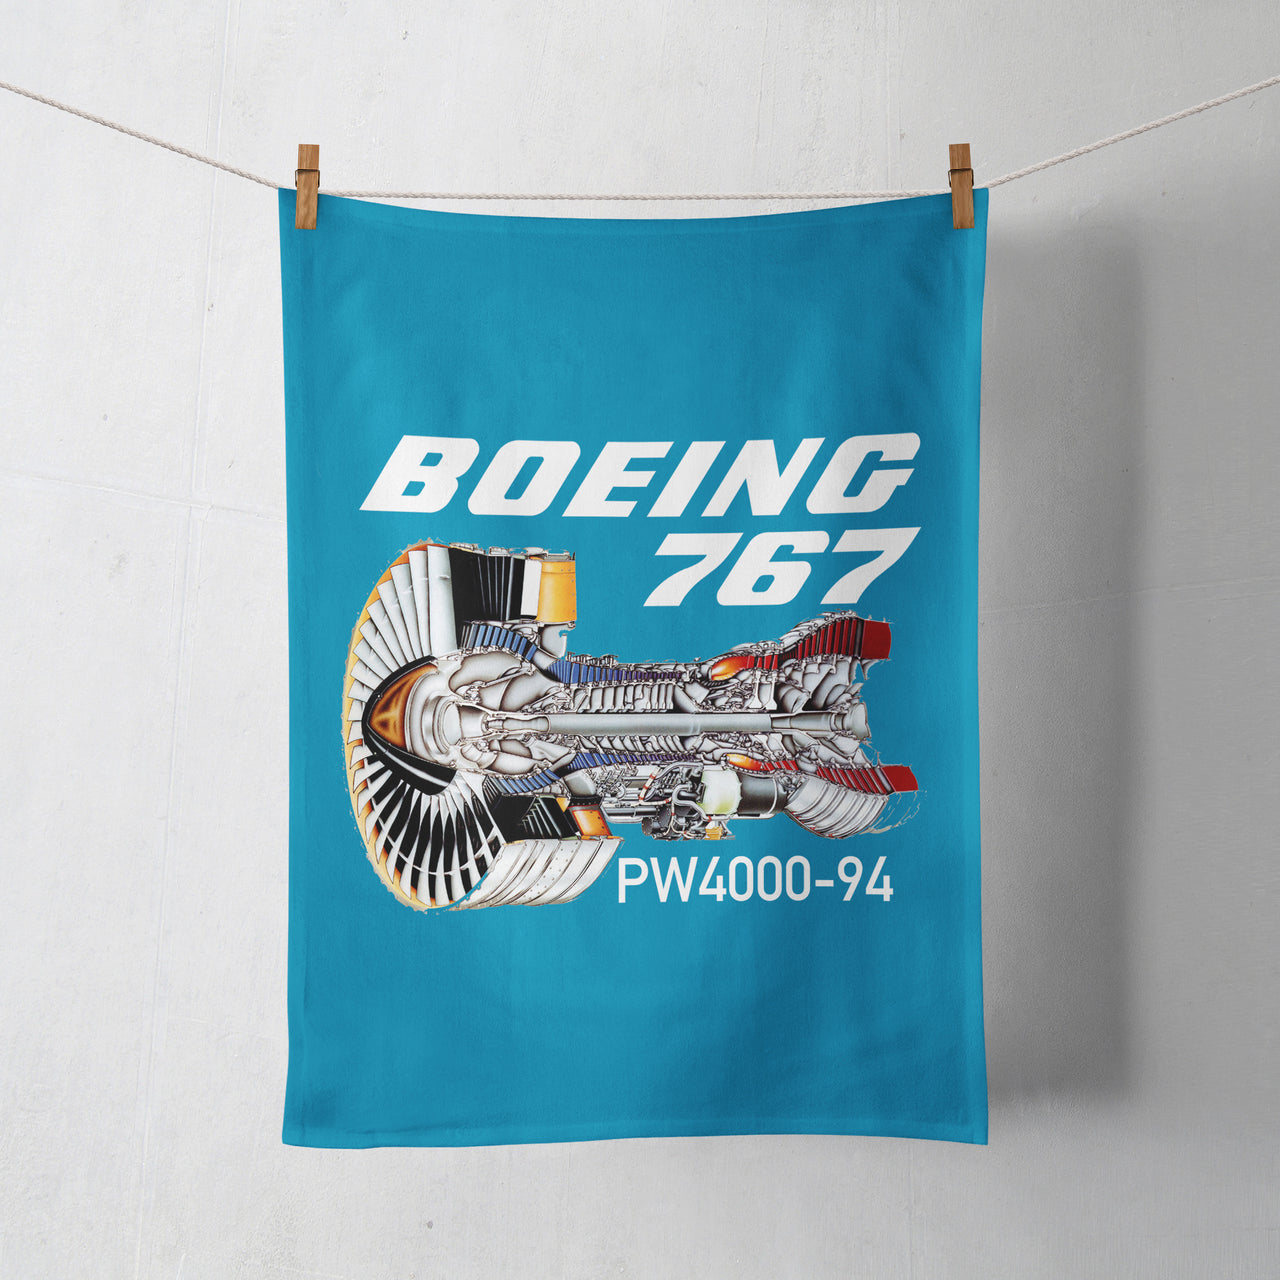 Boeing 767 Engine (PW4000-94) Designed Towels